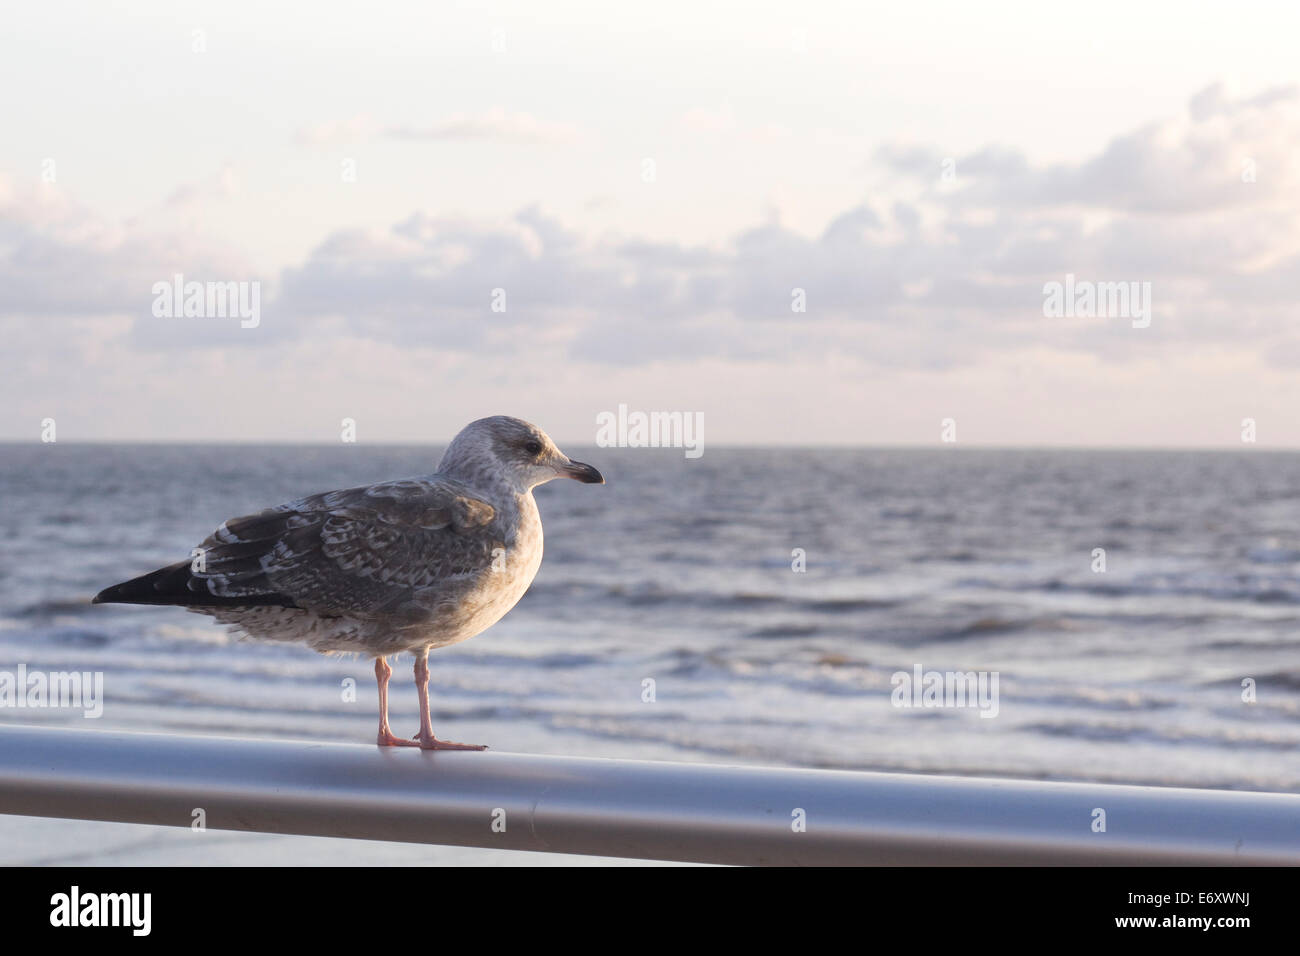 Seagull on a pole Looking out to sea Larus canus Stock Photo